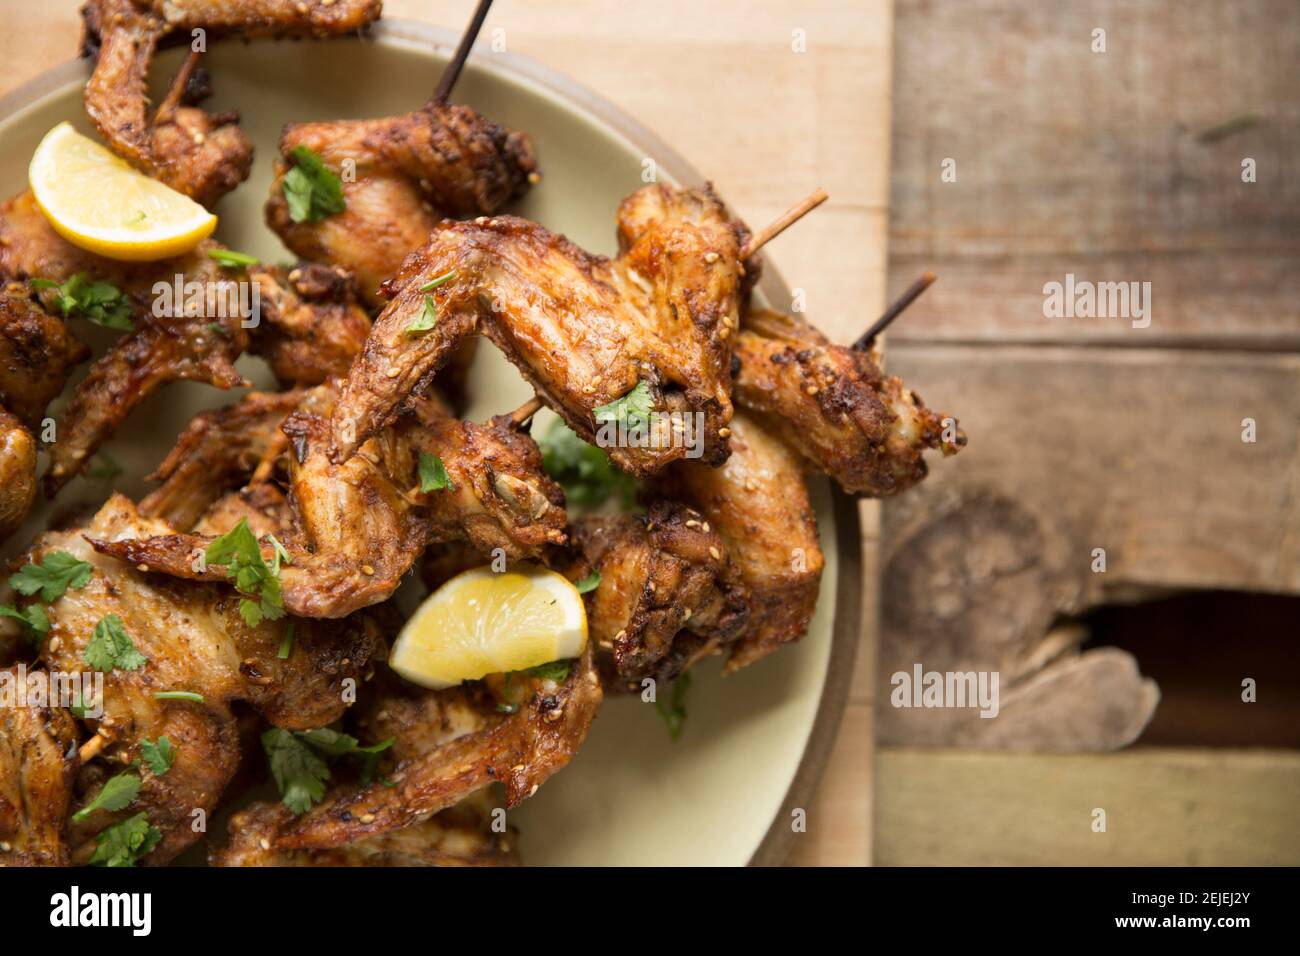 British chicken wings that have been marinated in chilli spices and zatar seasoning before being skewered on bamboo kebab skewers and then grilled. En Stock Photo